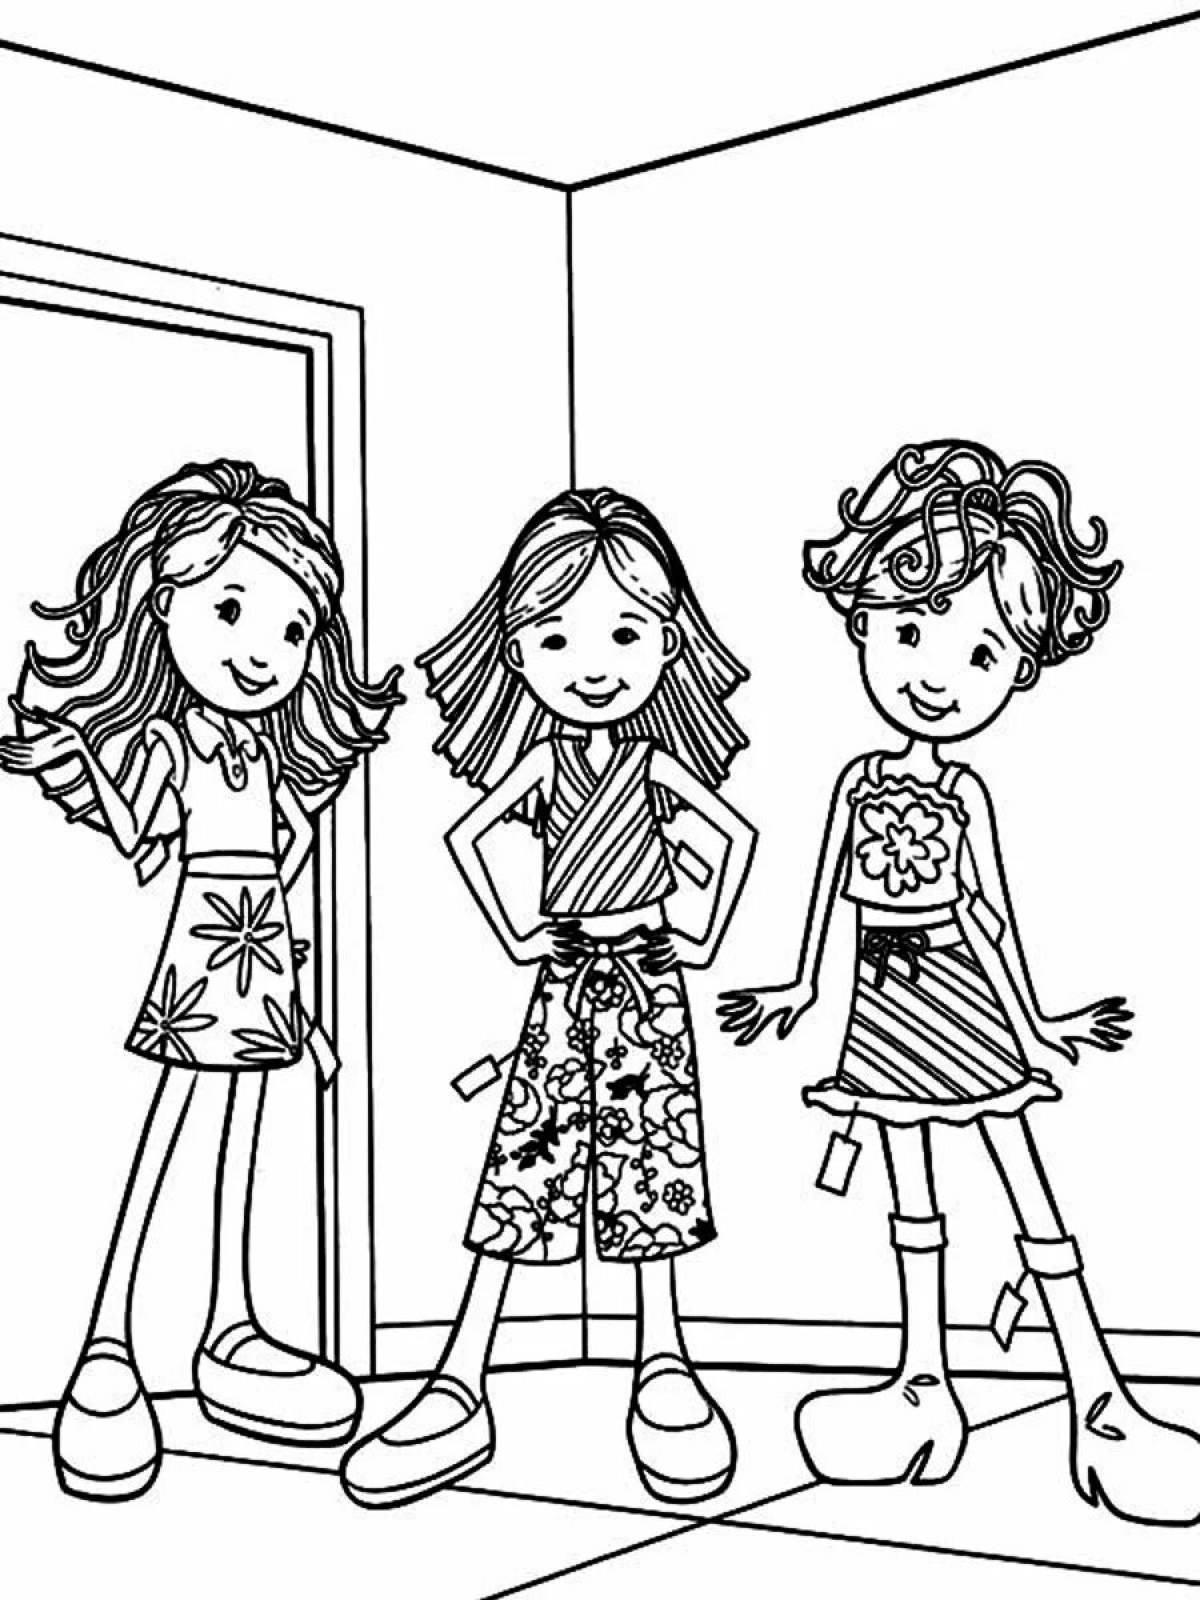 Coloring pages for girls and girlfriends